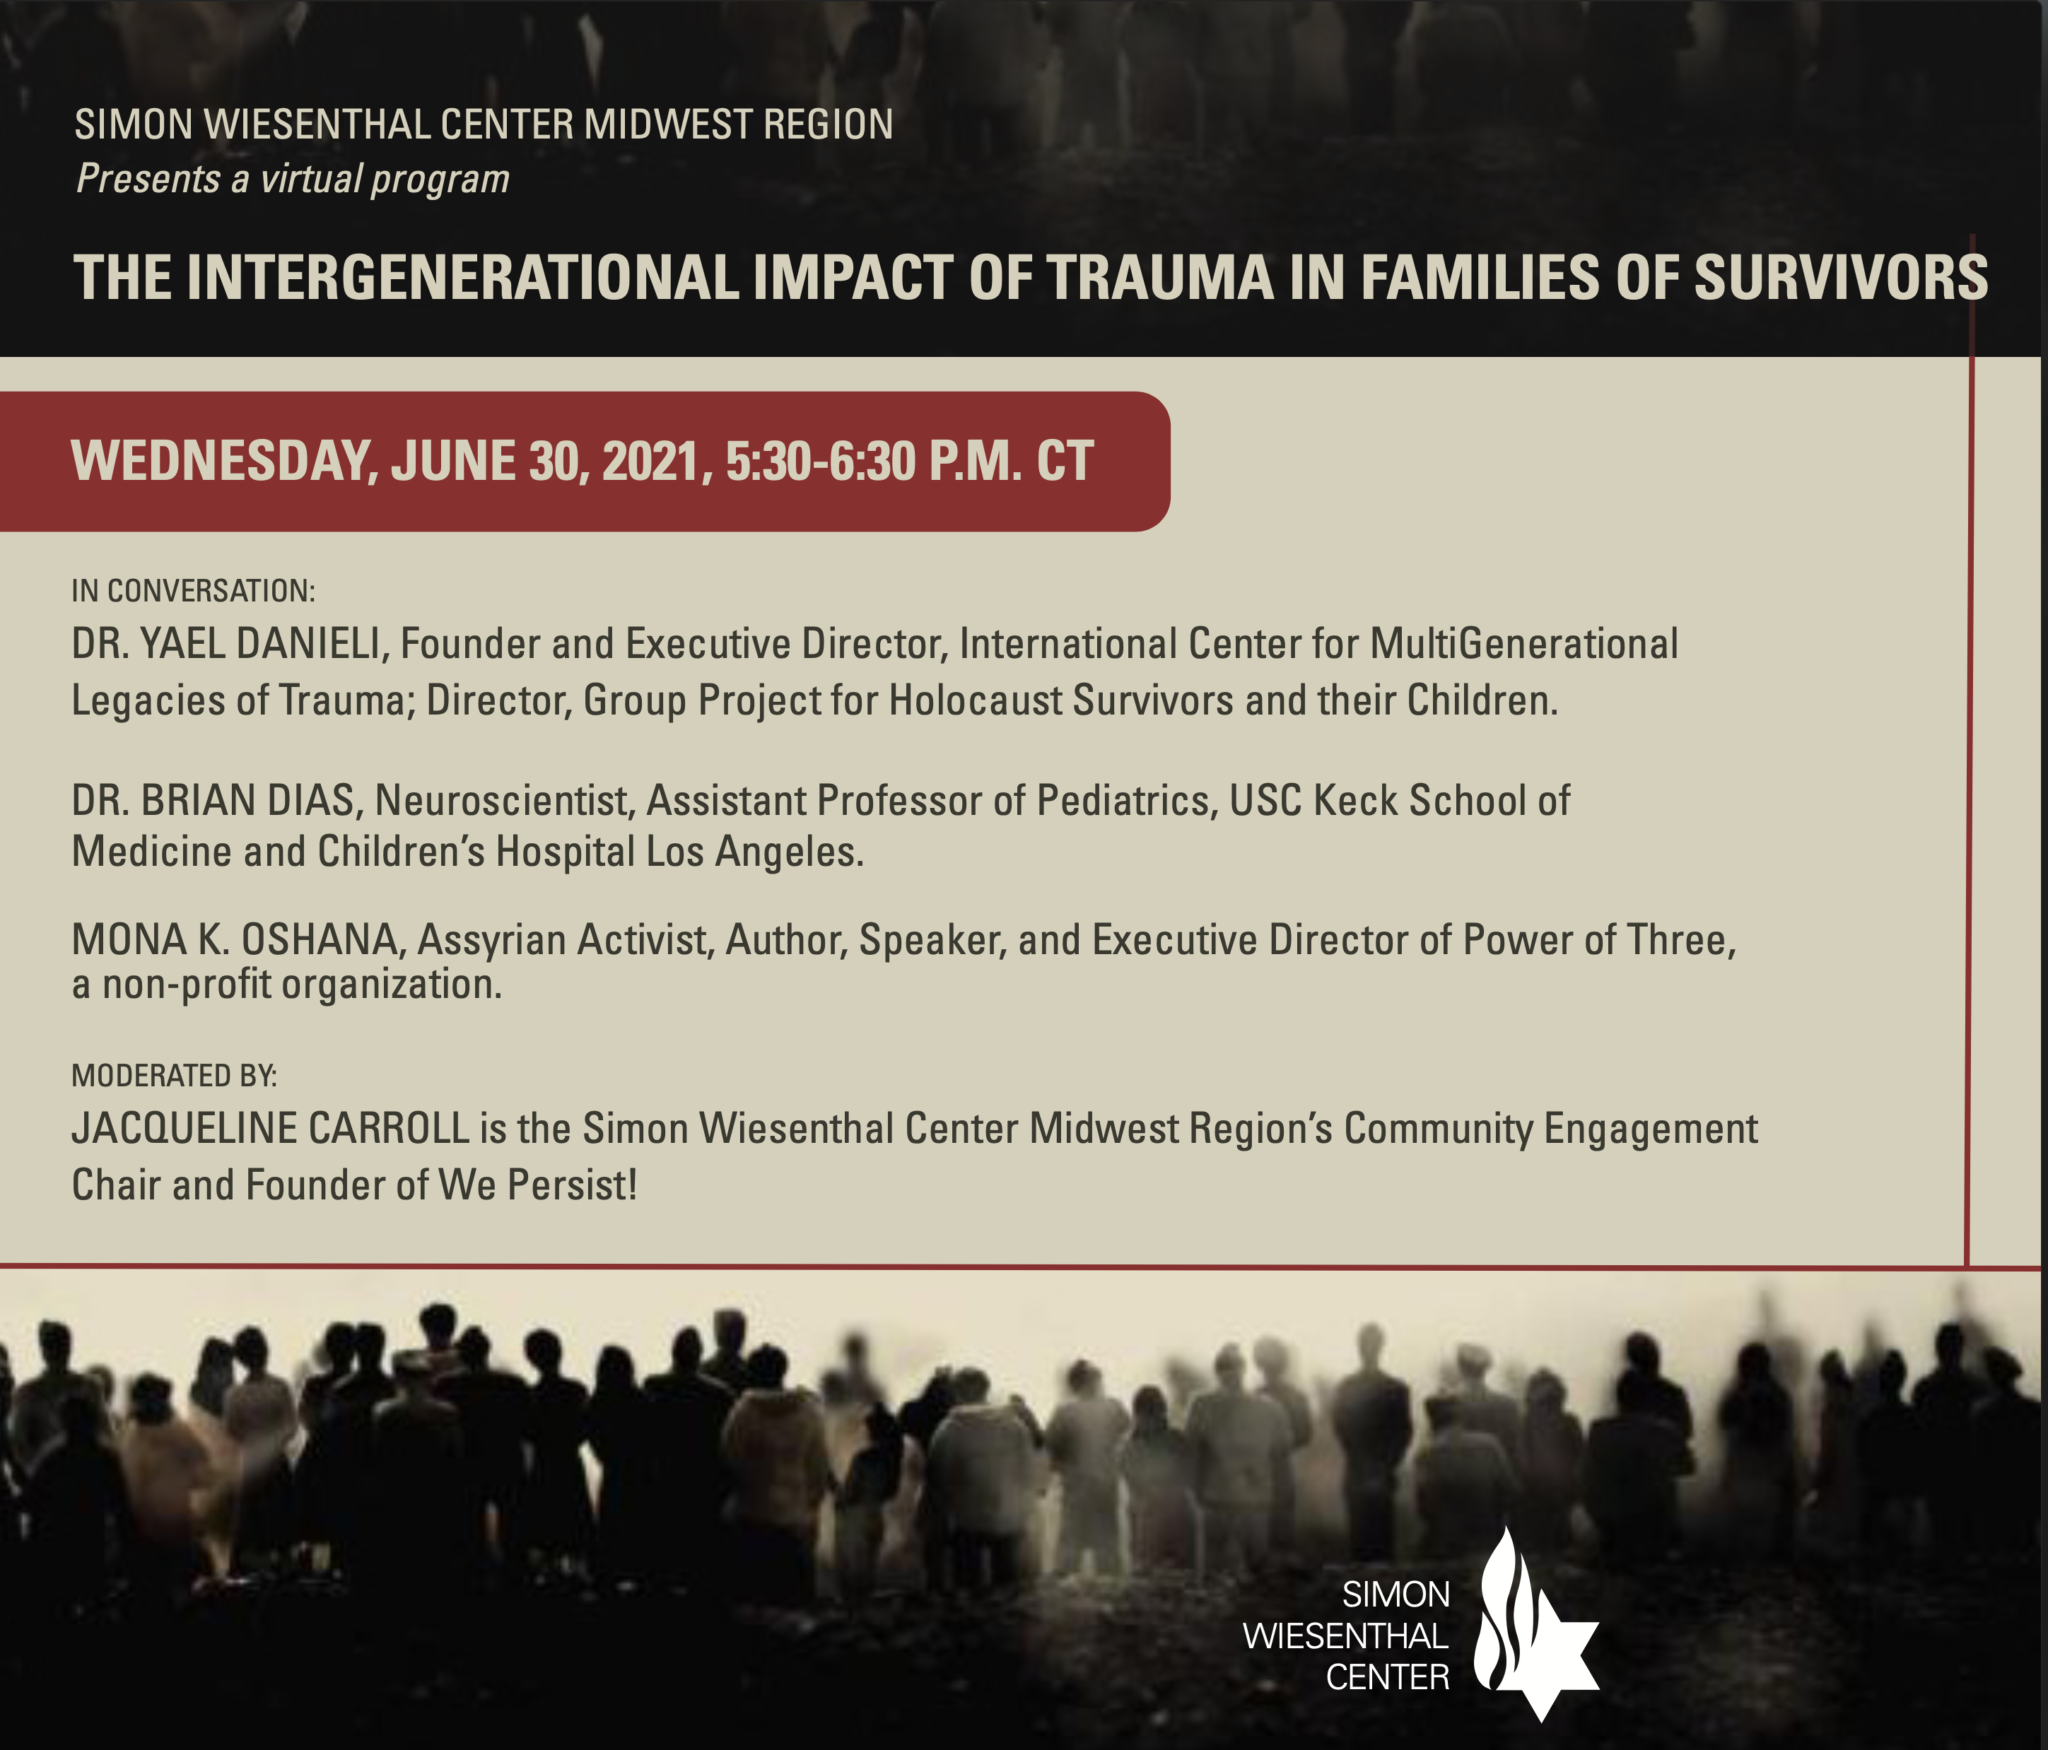 You are currently viewing SIMON WIESENTHAL CENTER MIDWEST REGION Presents a virtual program: THE INTERGENERATIONAL IMPACT OF TRAUMA IN FAMILIES OF SURVIVORS